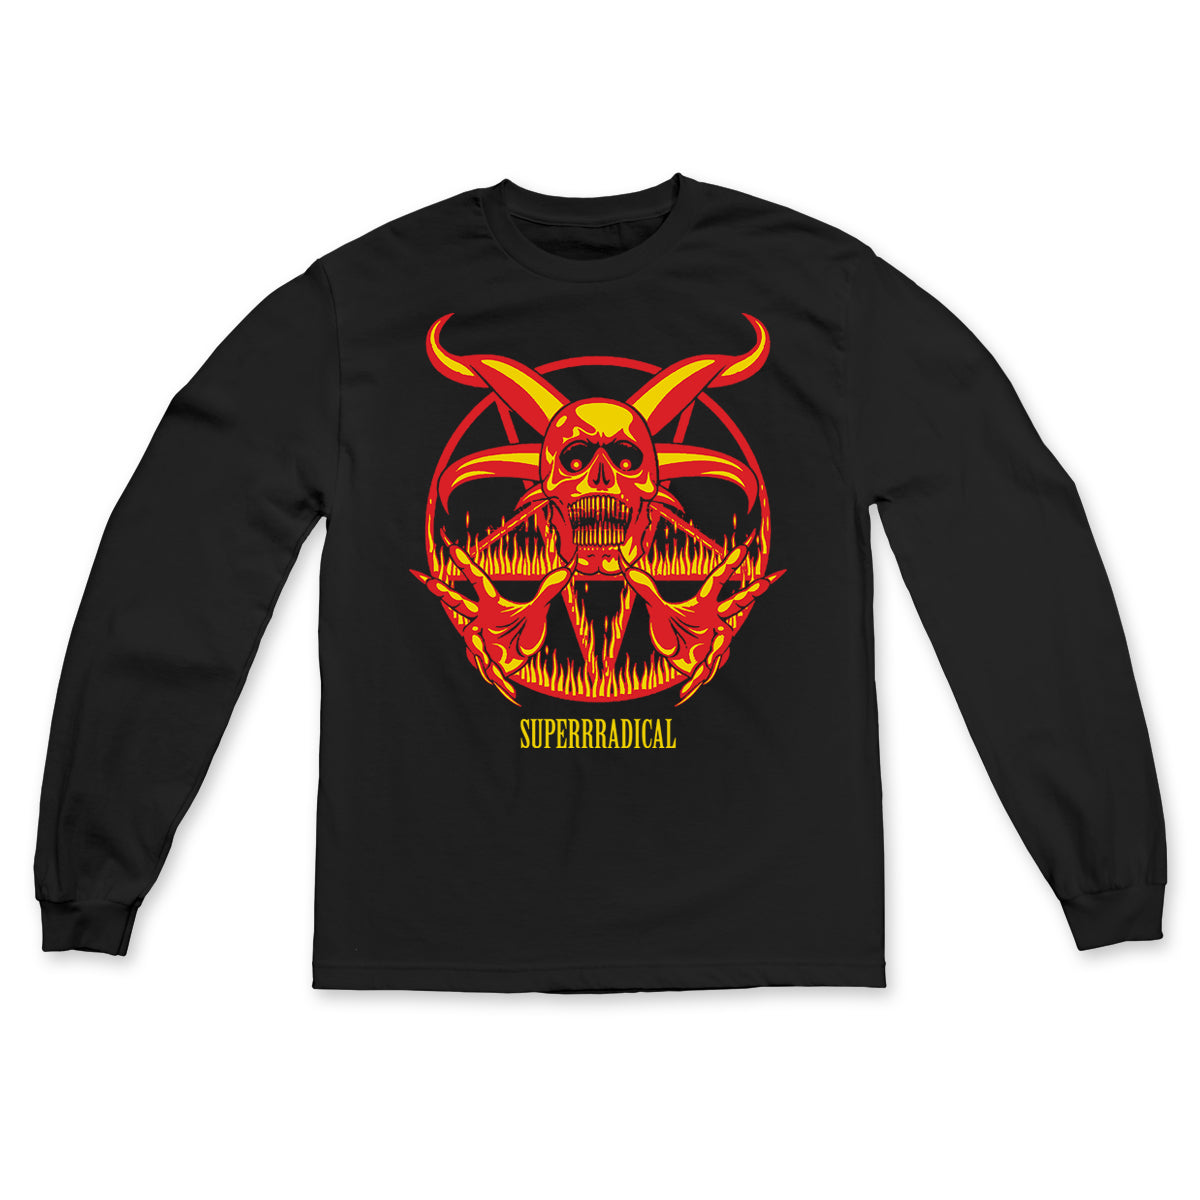 Superrradical "Hell Is Real" Long Sleeve